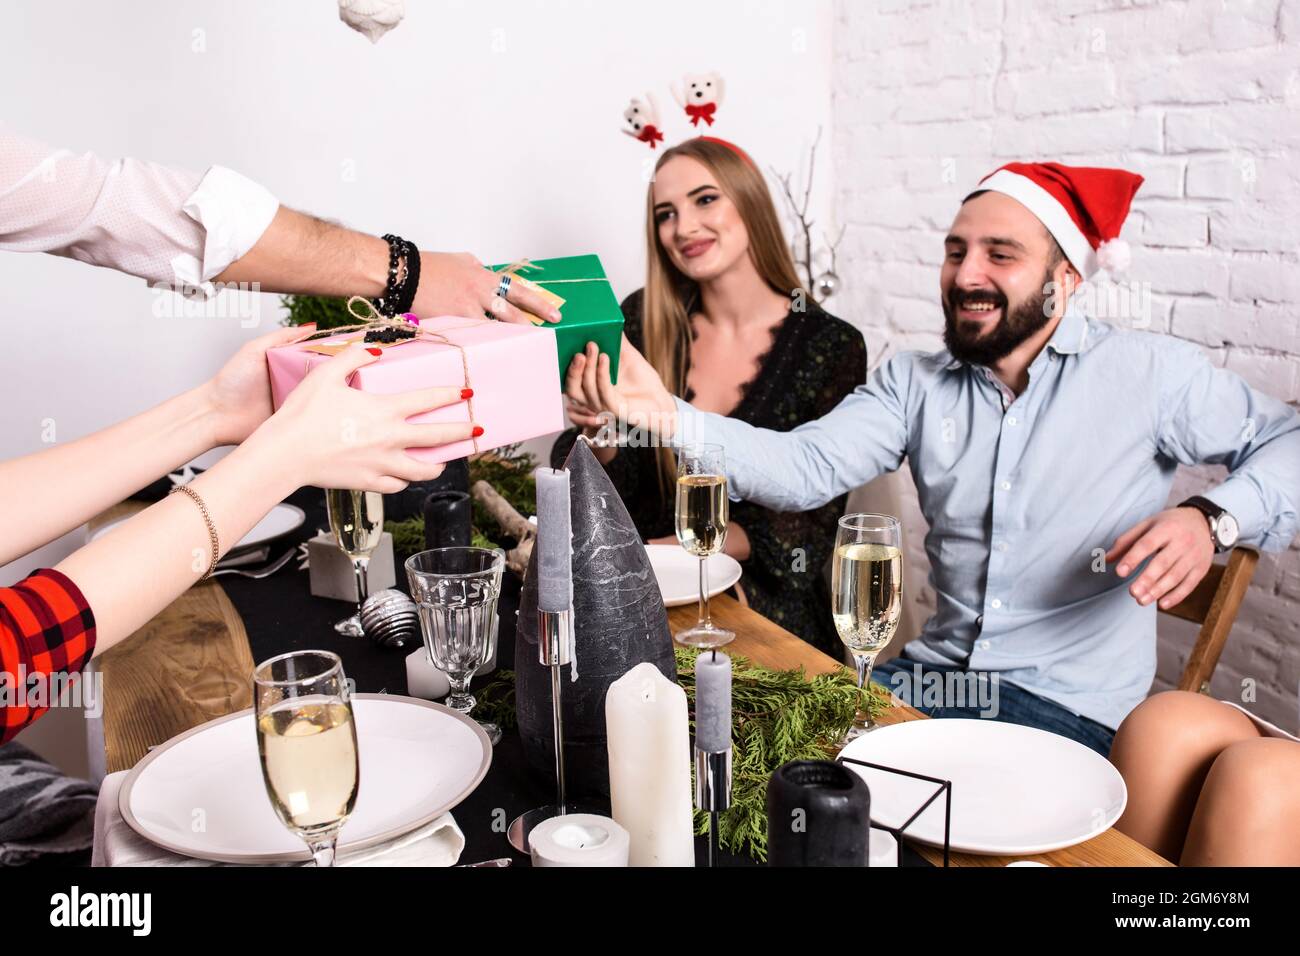 Picture showing group of friends celebrating Christmas at home and giving presents to each other Stock Photo